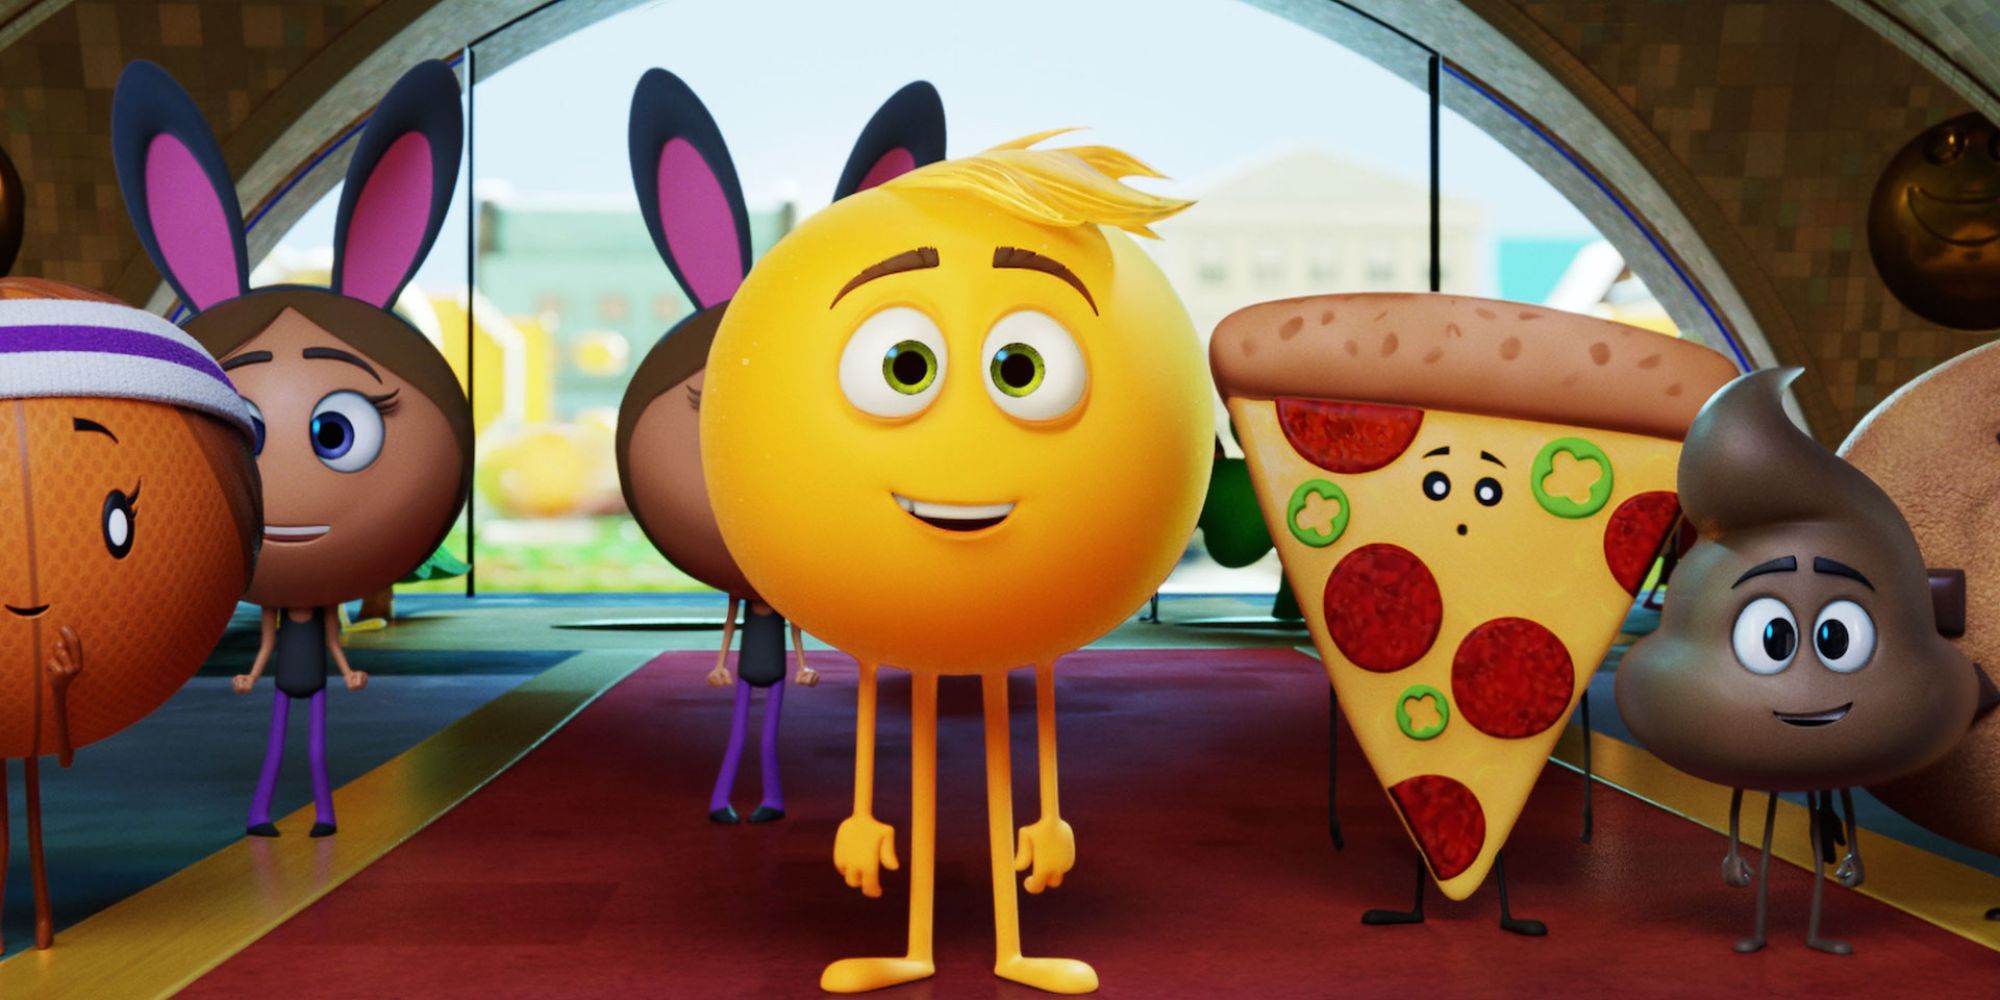 Promotional image for 'The Emoji Movie'